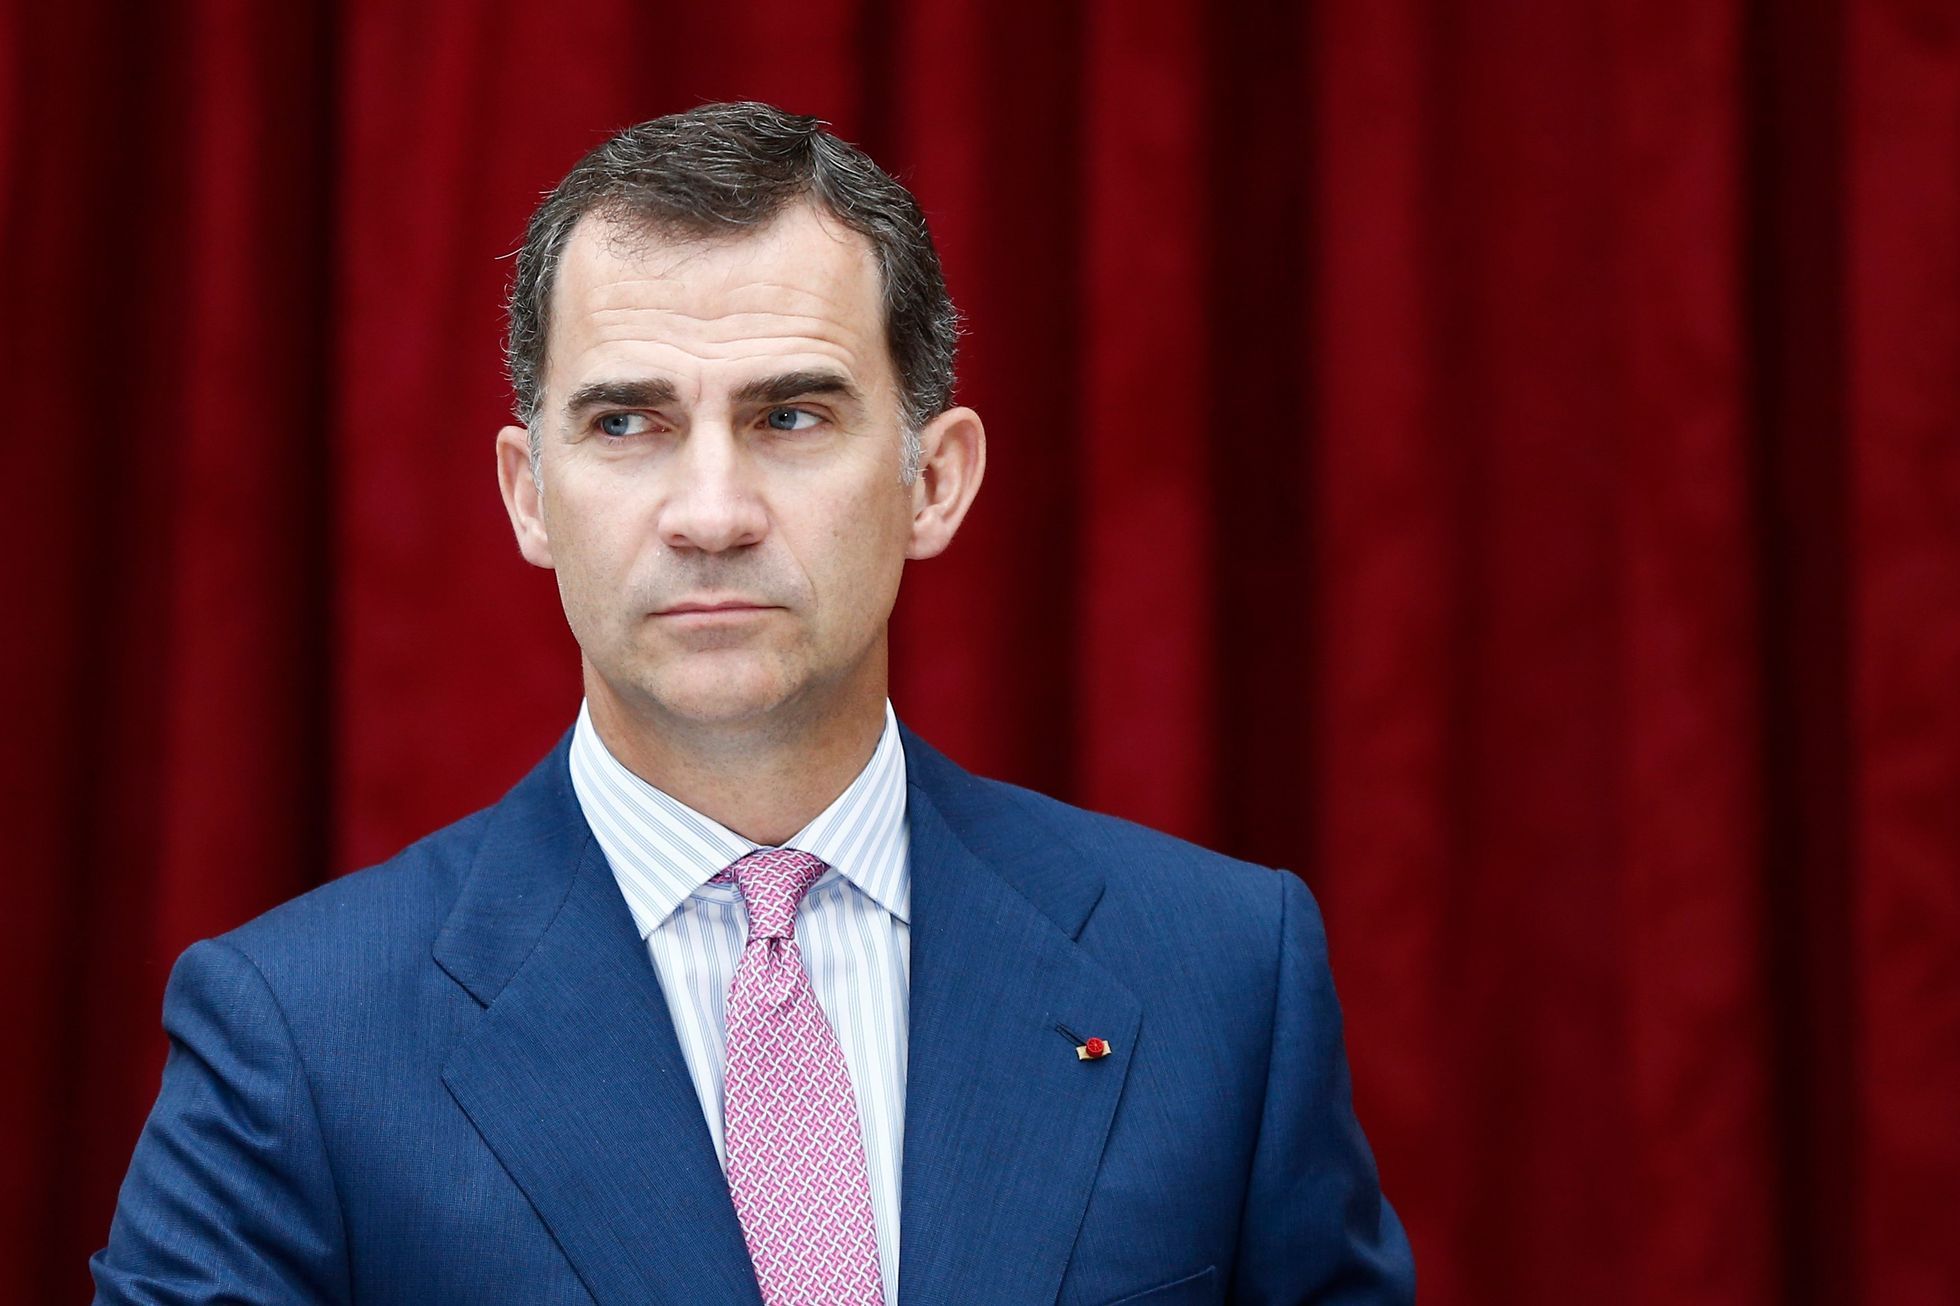 Spain's King Felipe VI attends a lunch with French President Francois Hollande at the Elysee Palace in Paris